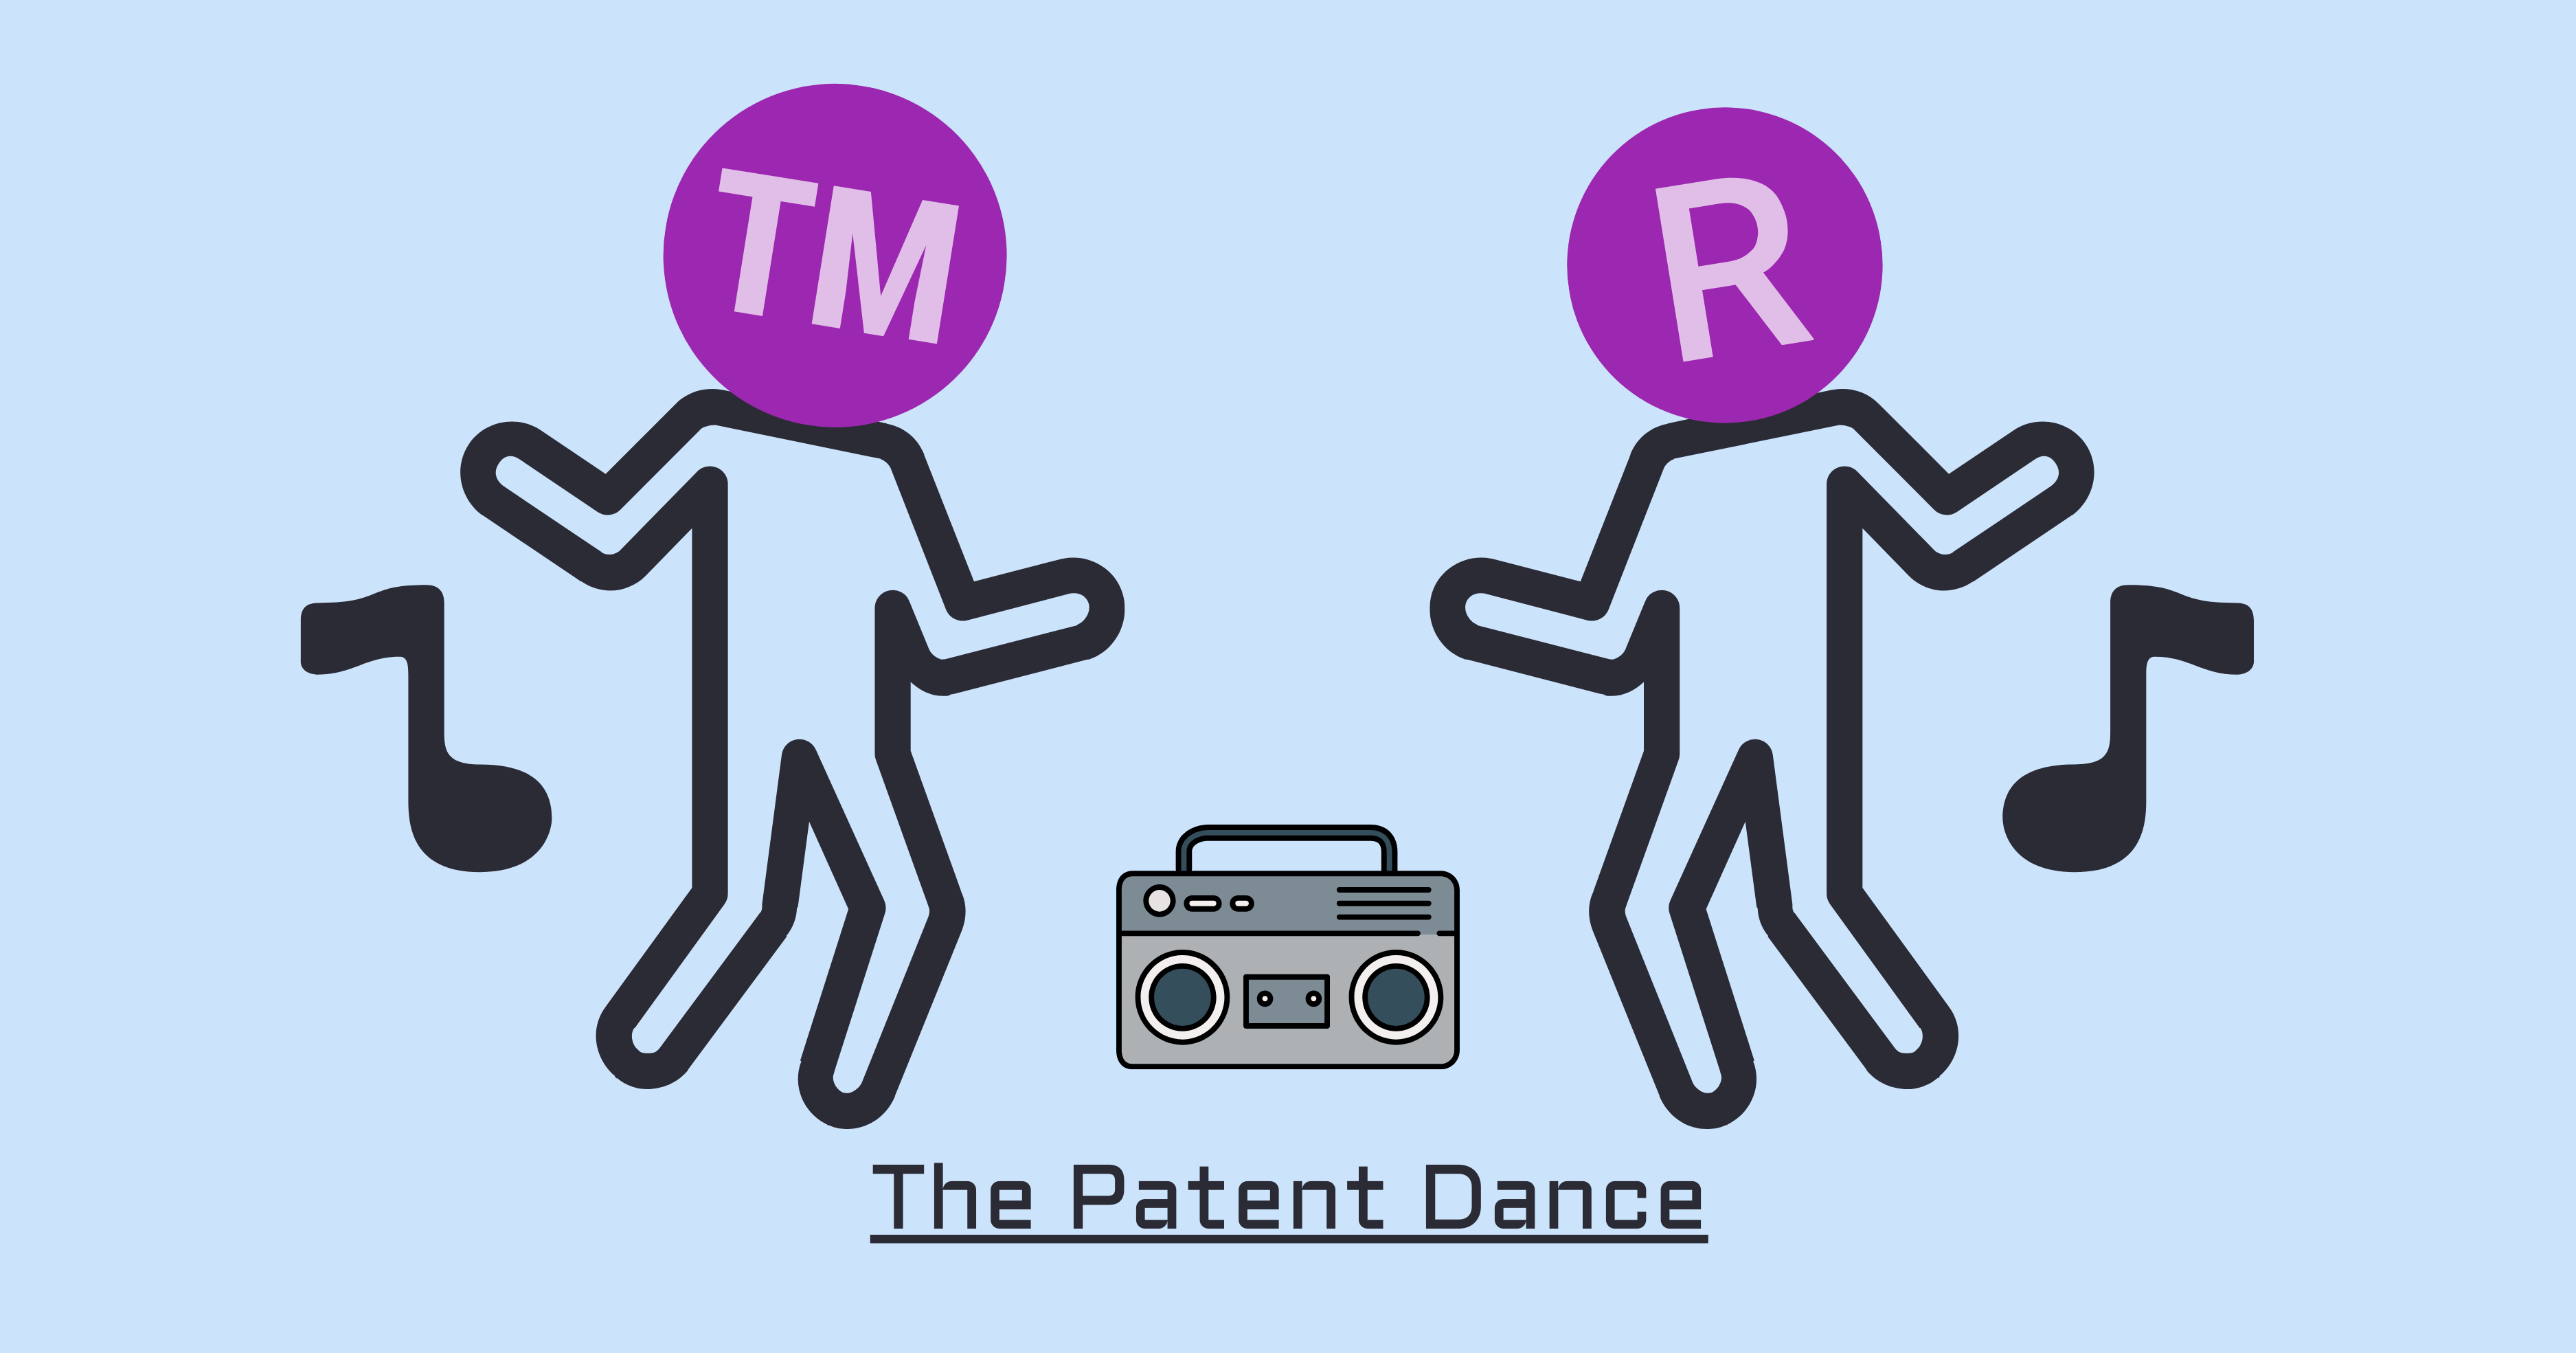 The patent dance graphic. 